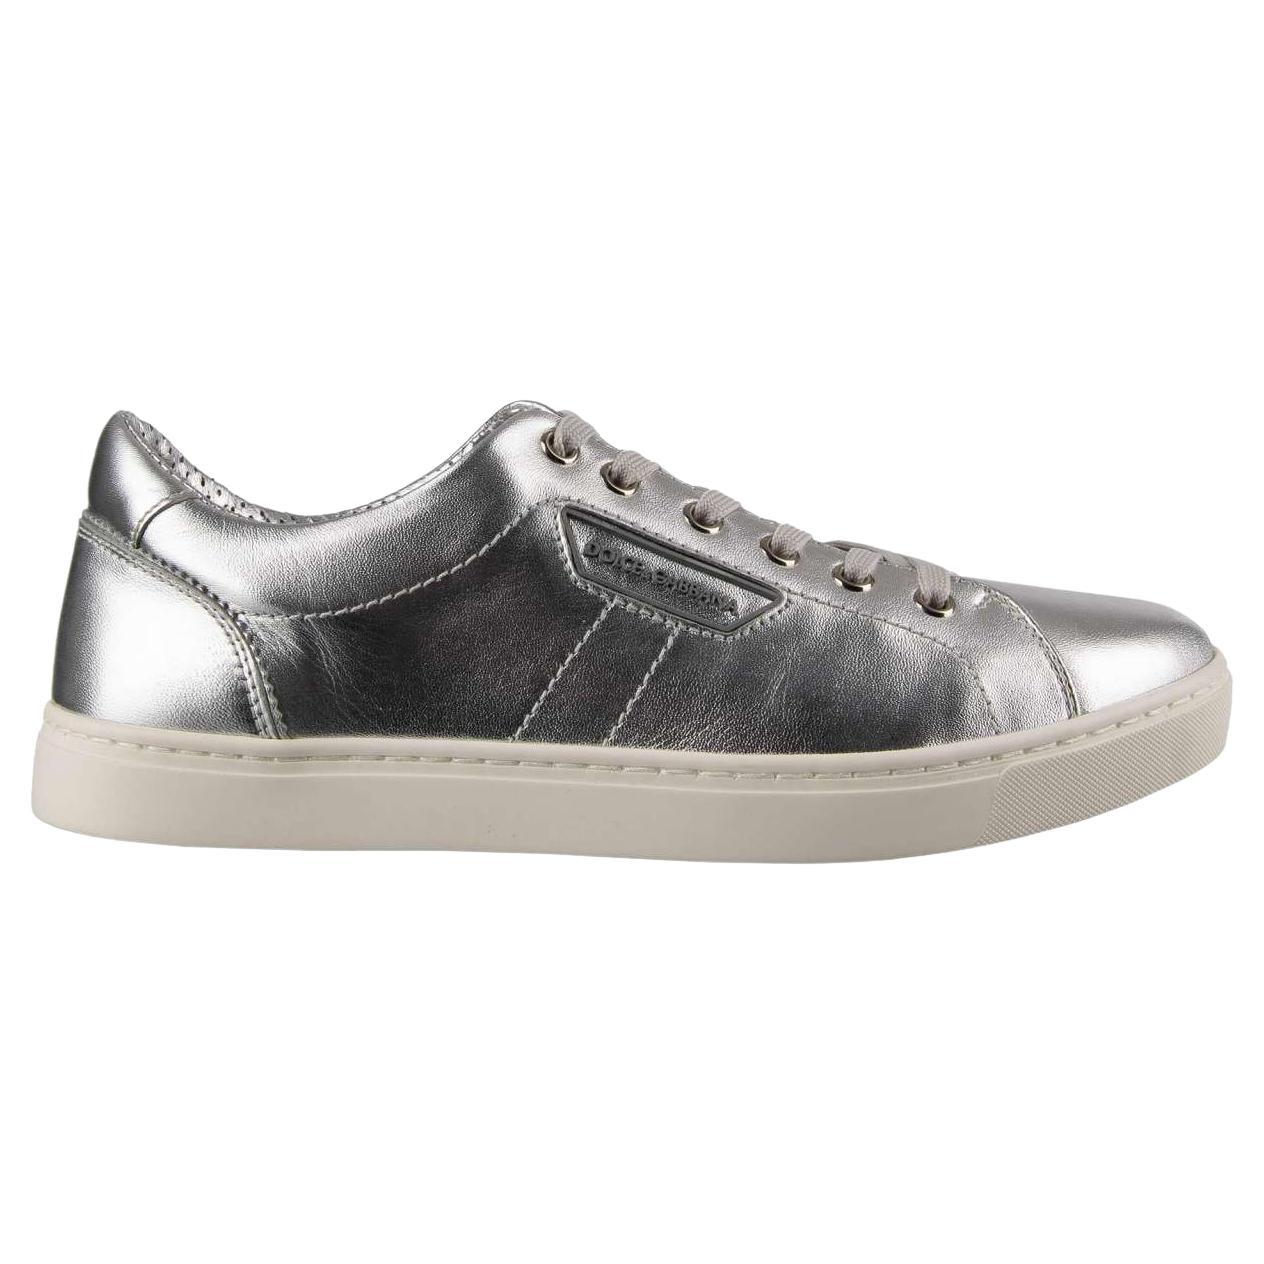 Dolce & Gabbana - Nappa Leather Sneakers LONDON Silver EUR 39 For Sale